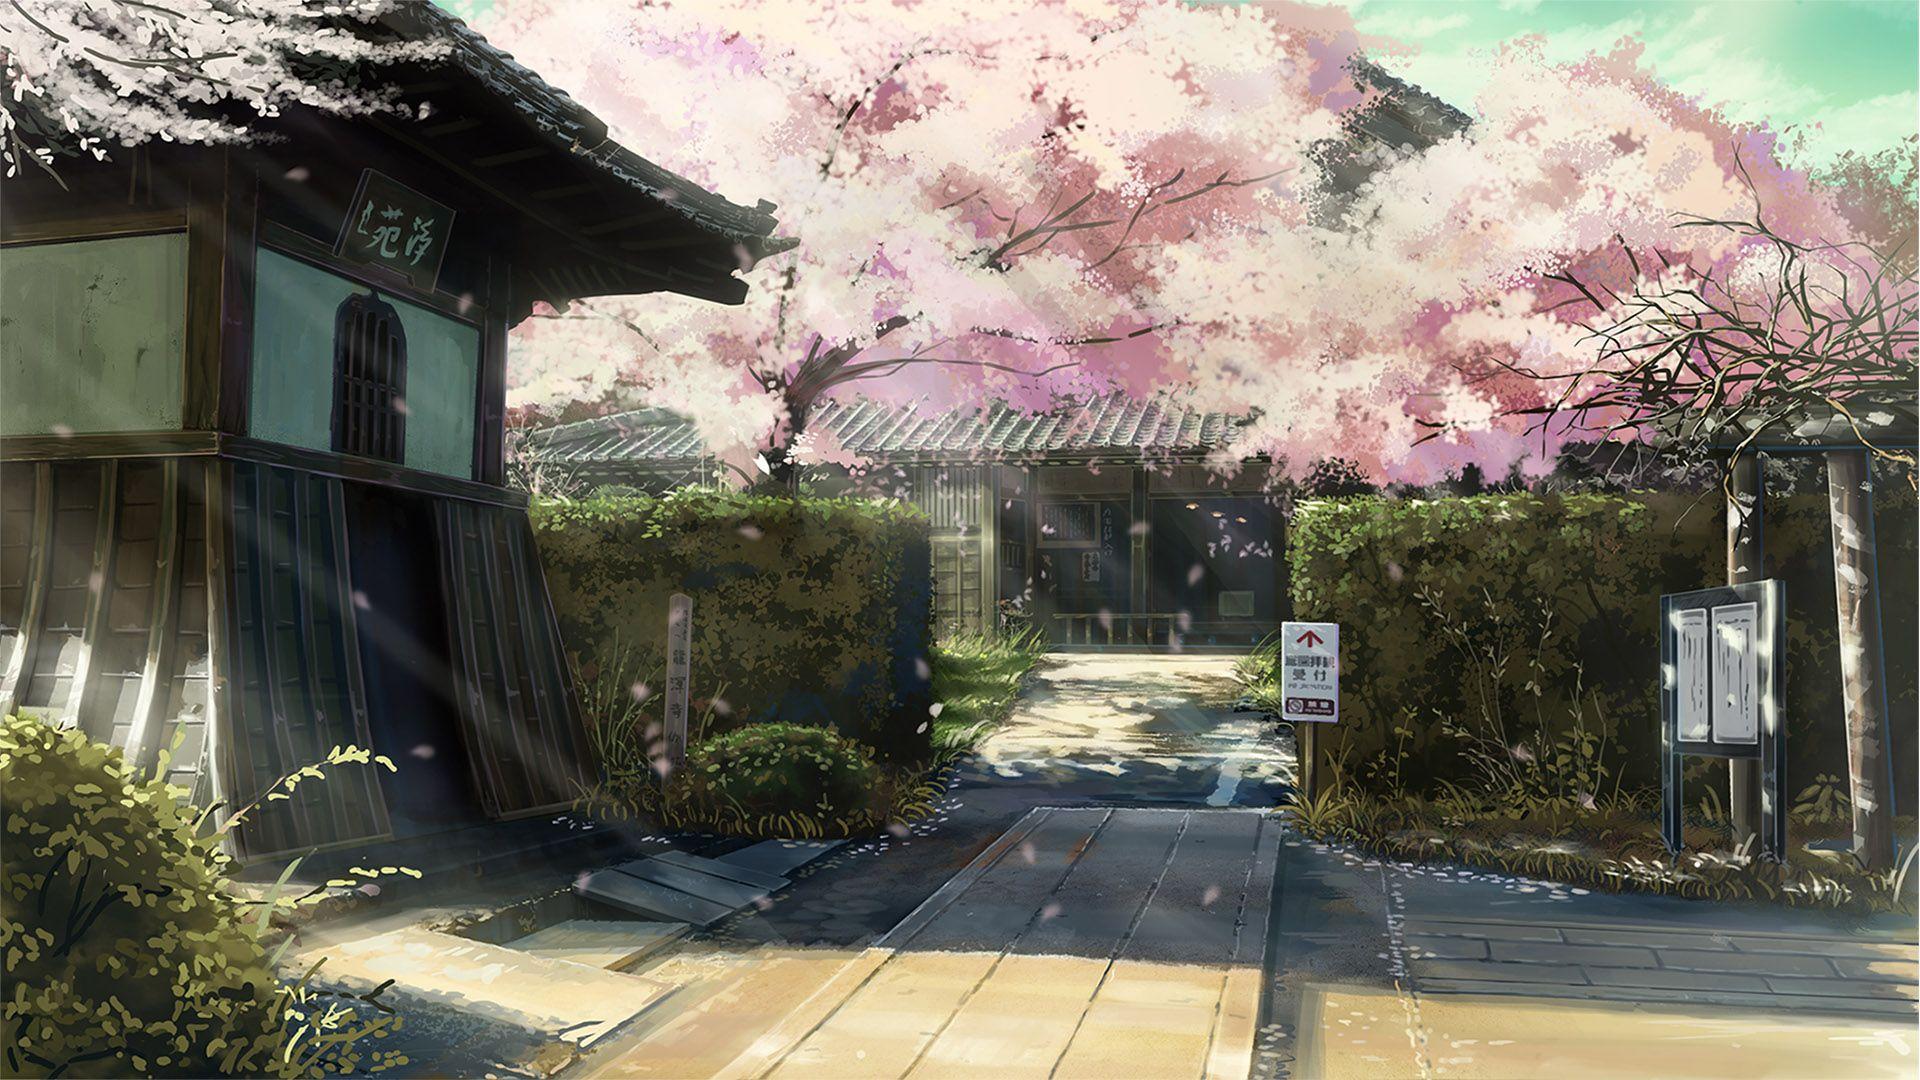 An anime house it looks really quaint  Anime scenery Episode backgrounds  Anime places